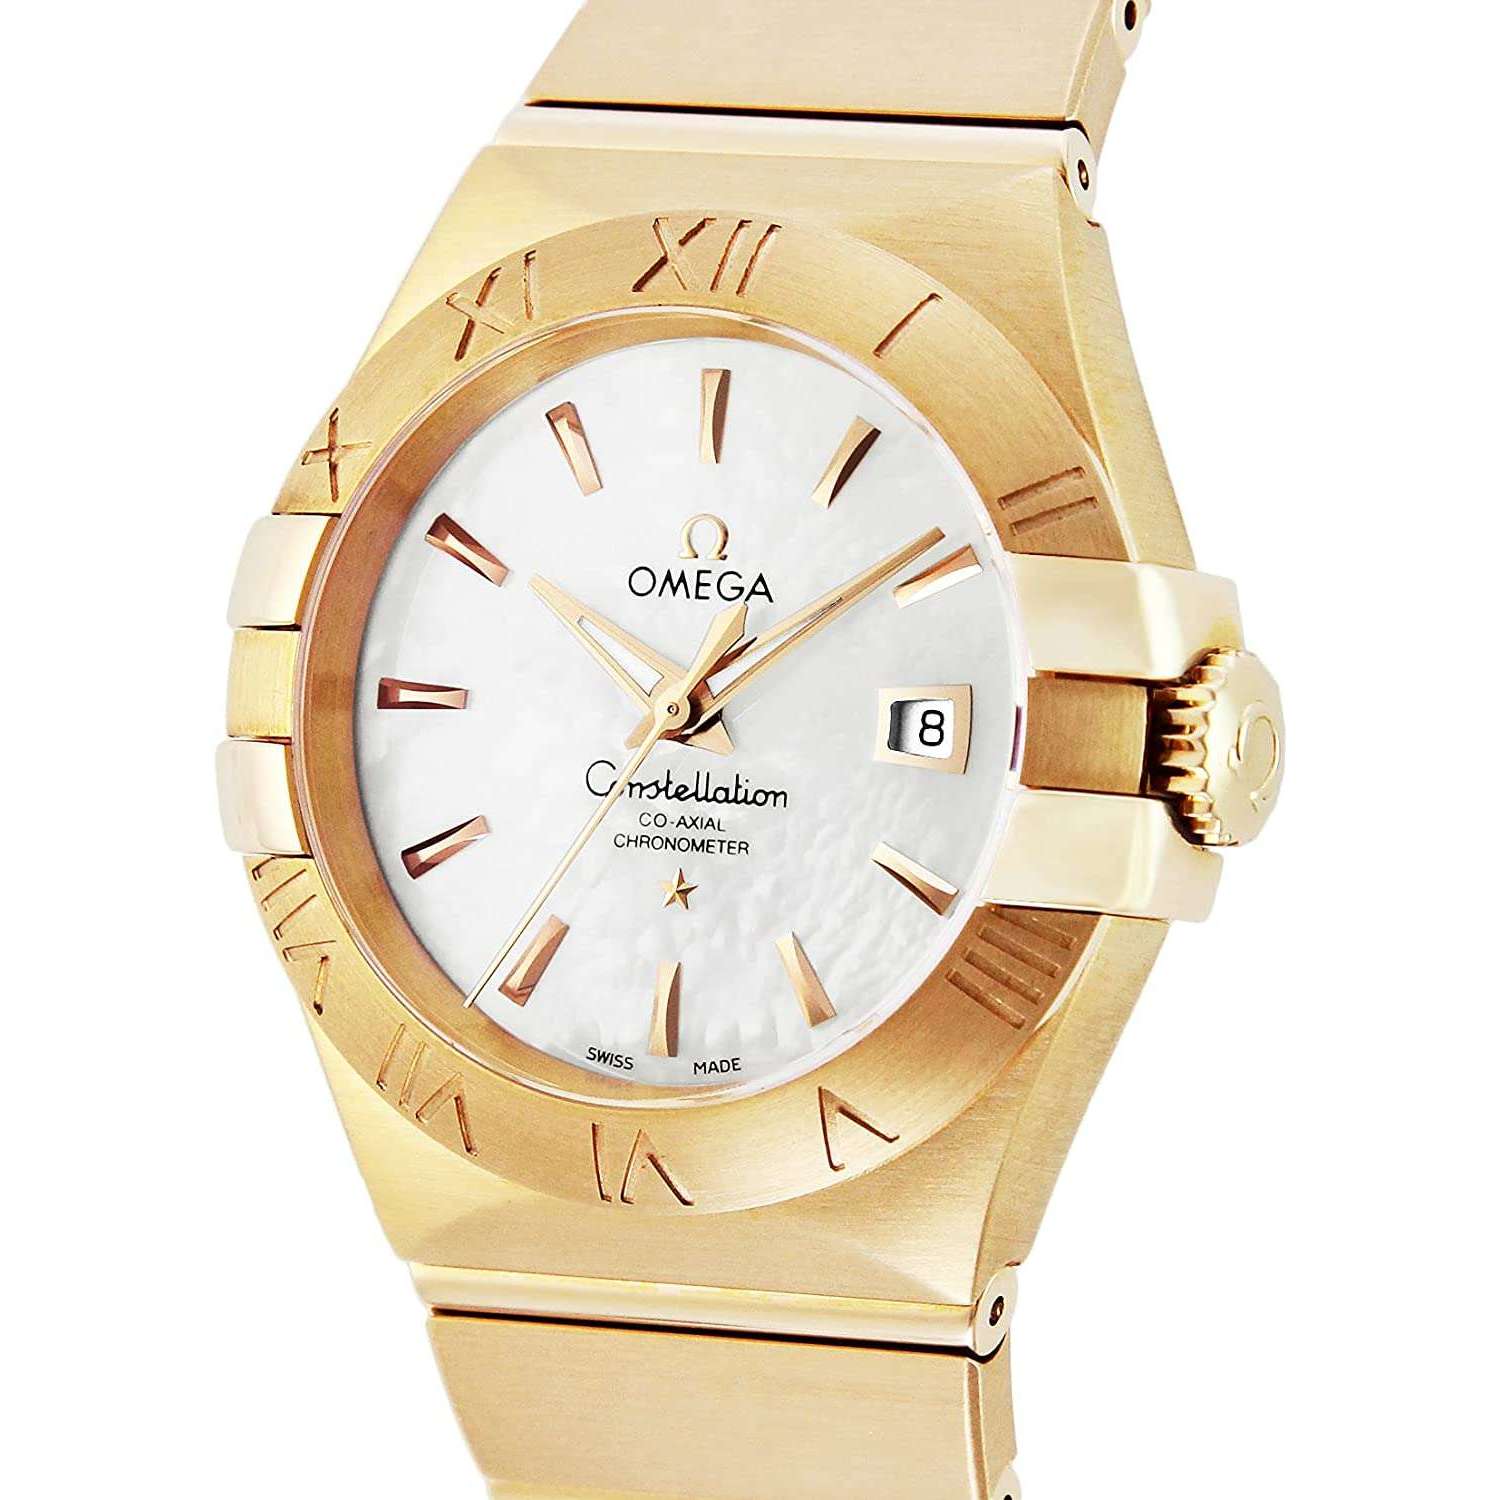 ROOK JAPAN:OMEGA CONSTELLATION CO‑AXIAL CHRONOMETER 31 MM WOMEN WATCH 123.50.31.20.05.002,Luxury Watch,Omega